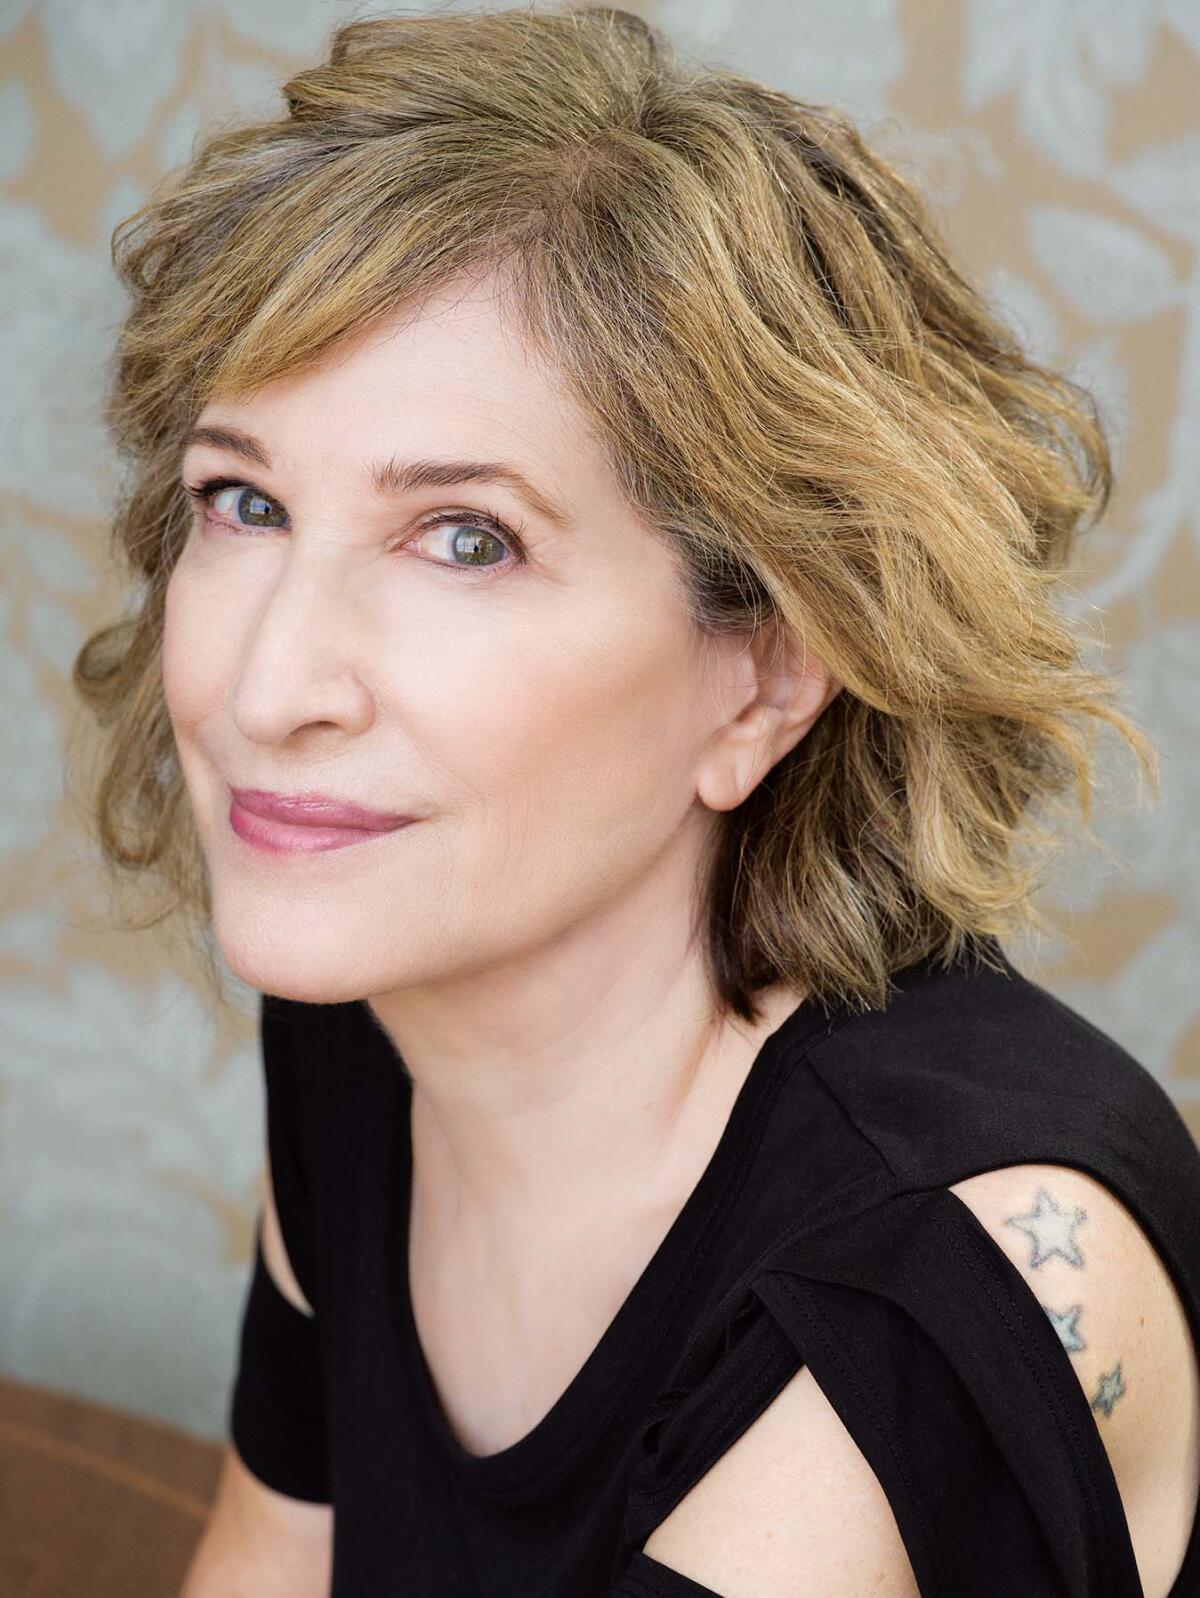 Laura Kipnis' latest book on the culture of sexuality is "Love in the Time of Contagion."